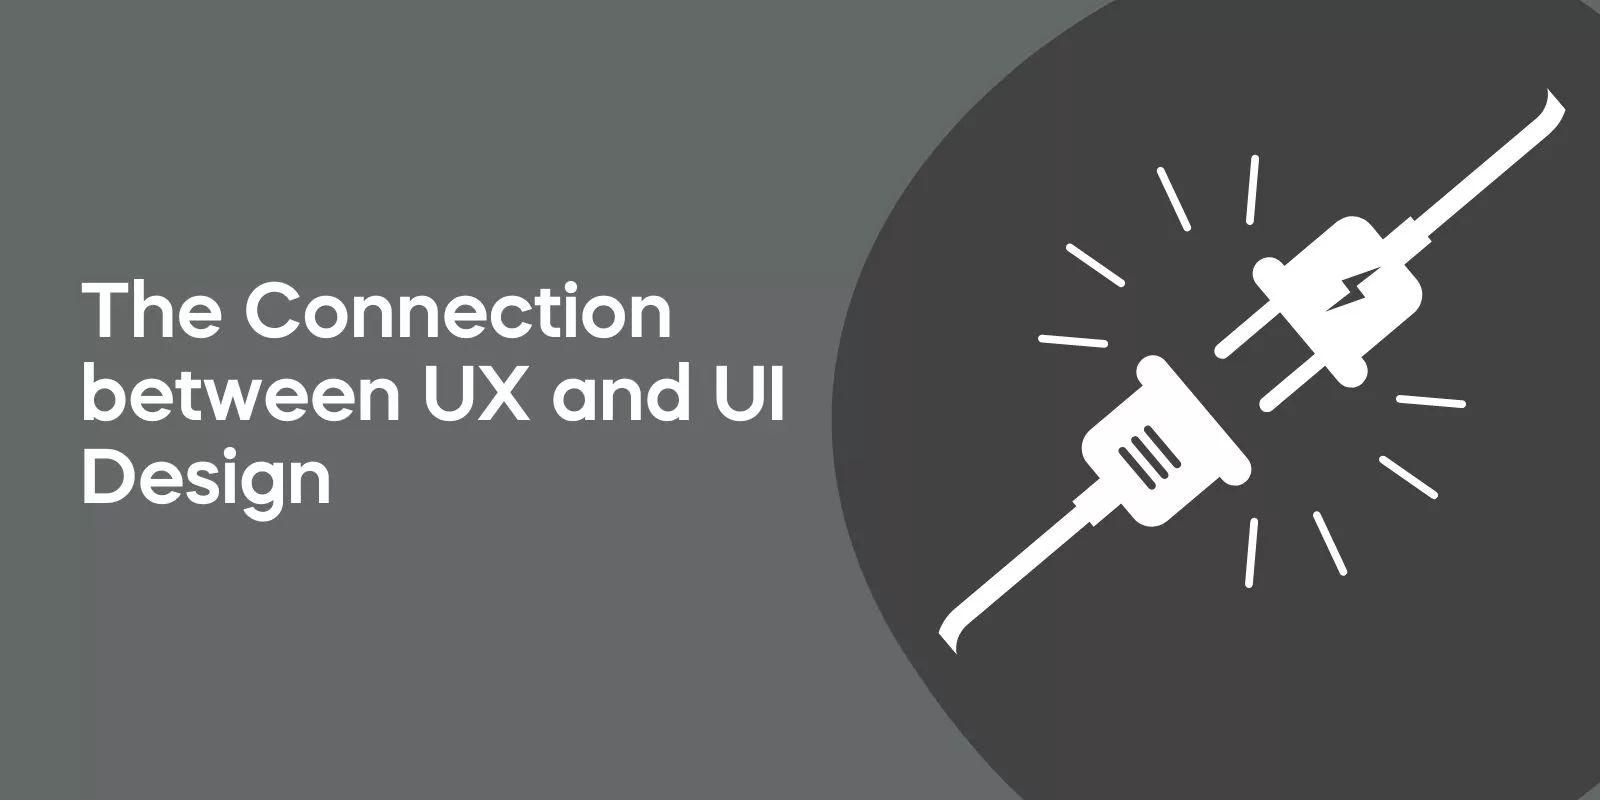 The Connection between UX and UI Design